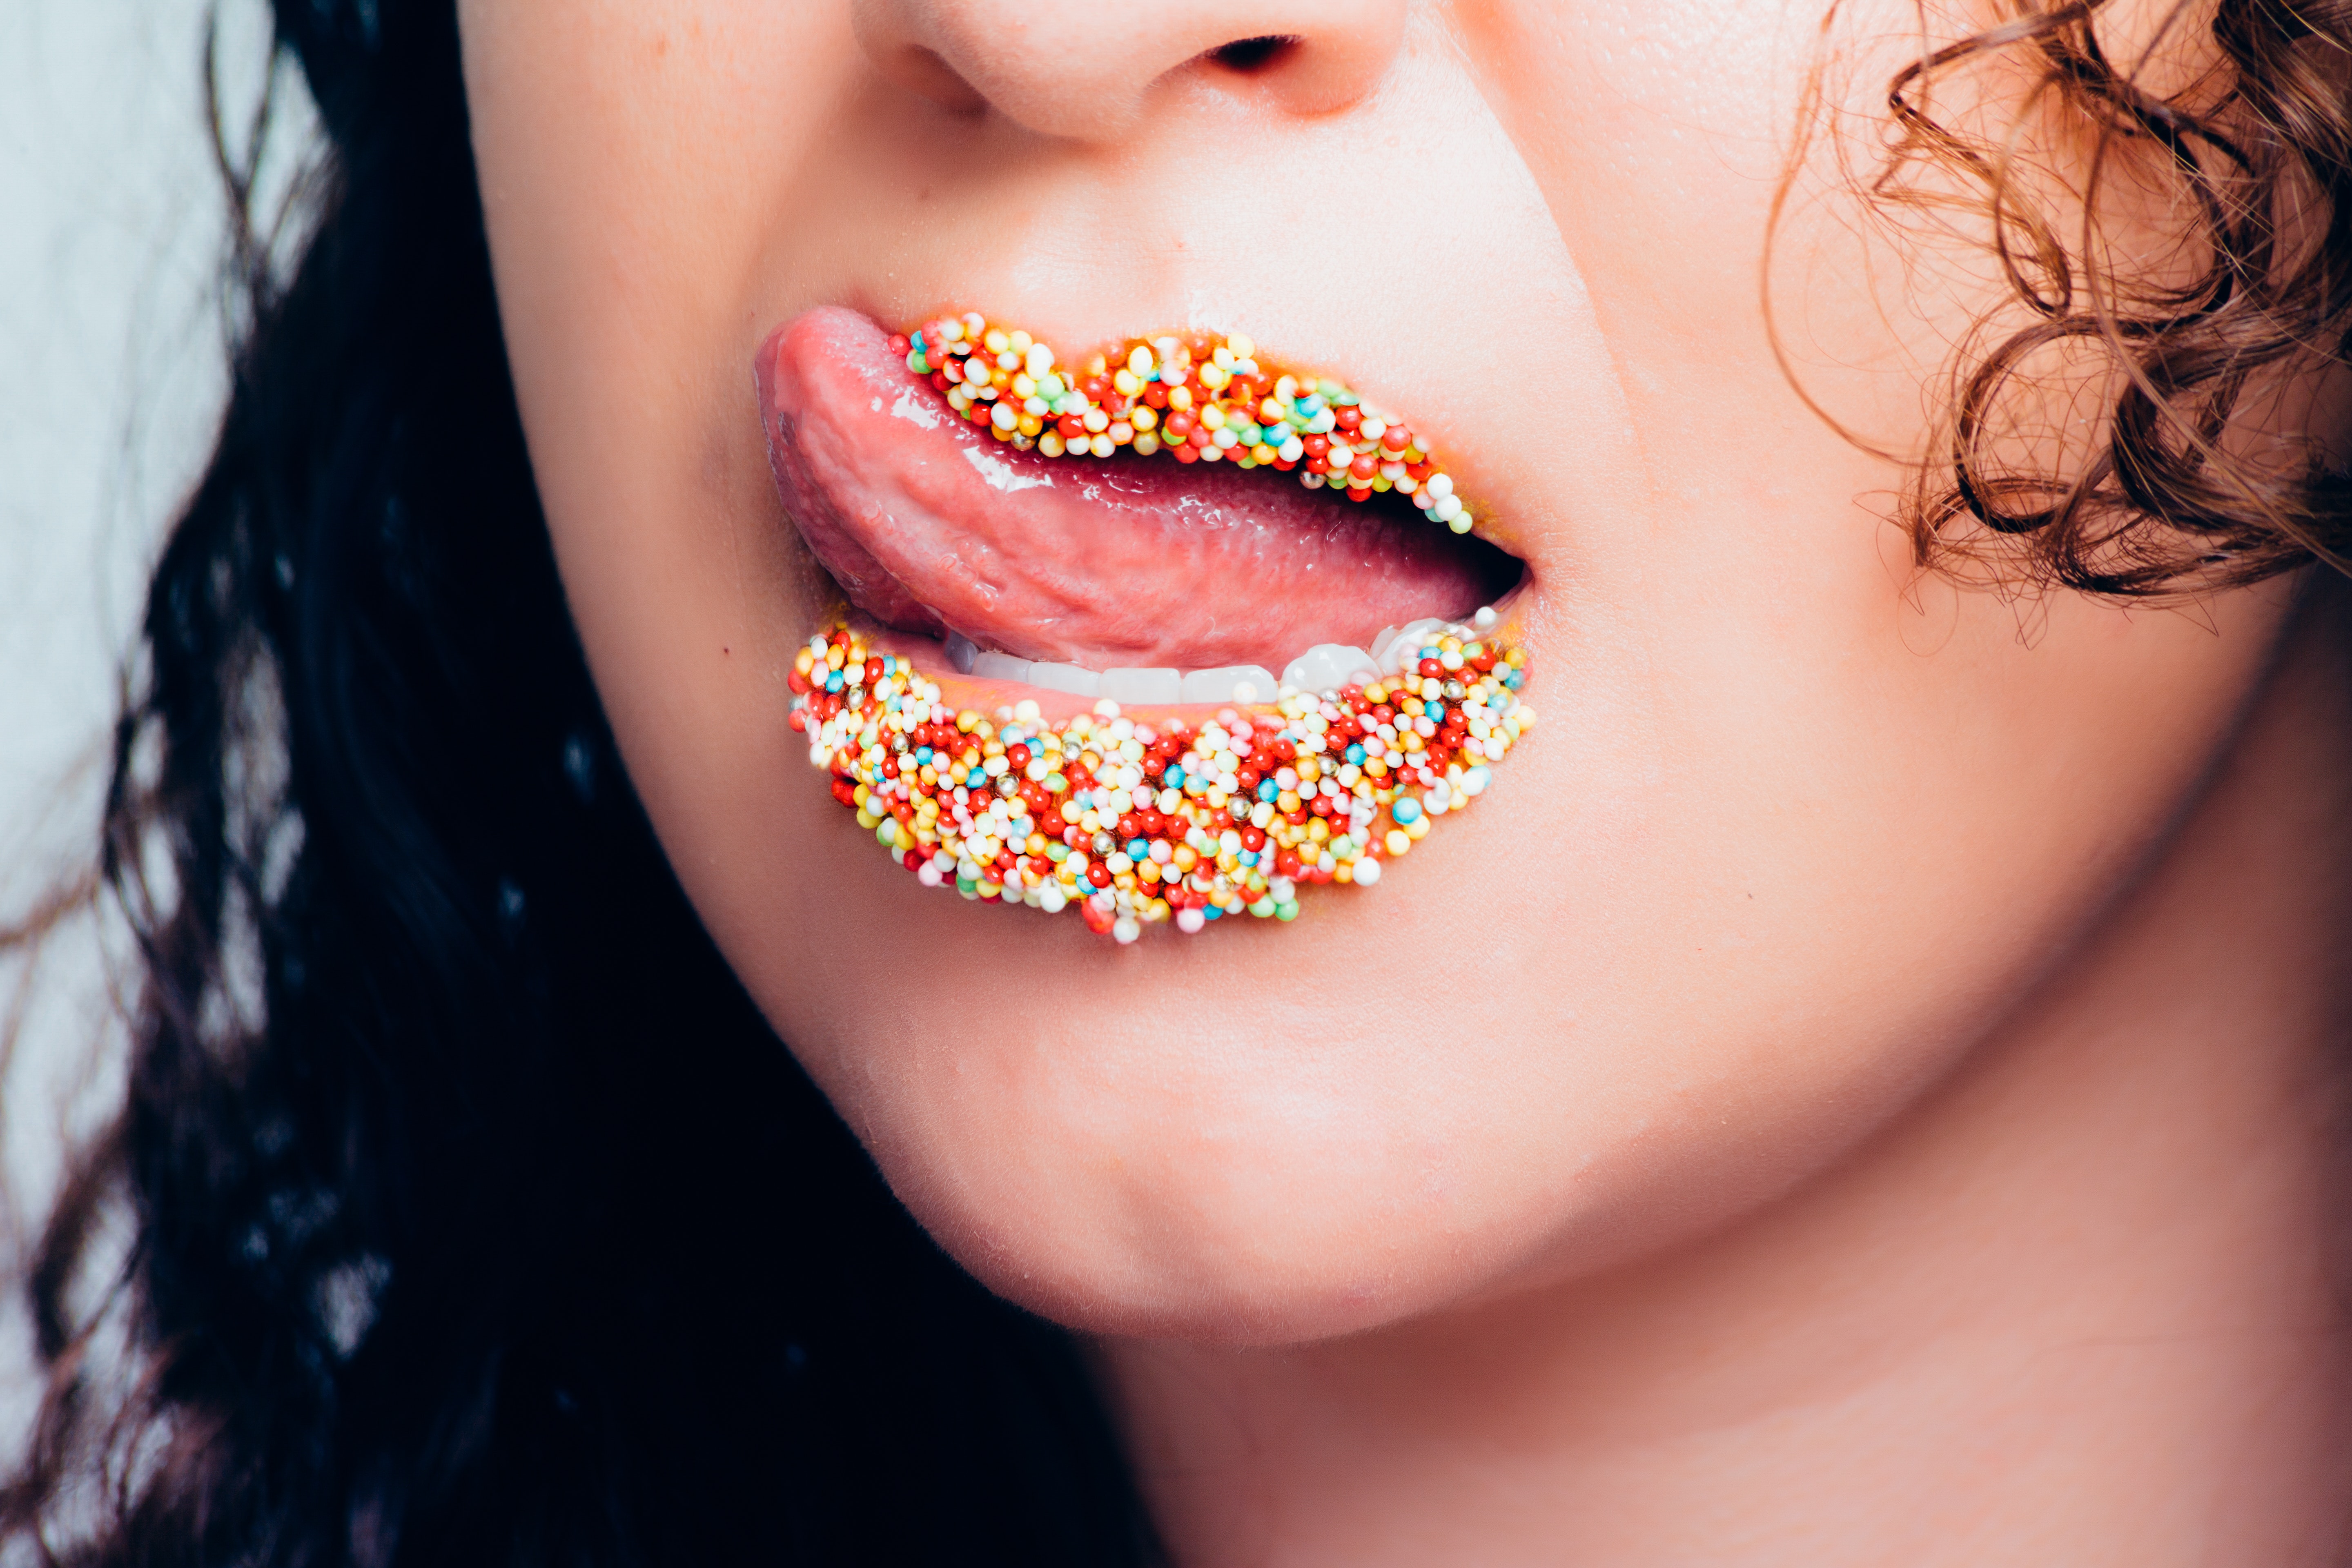 Woman with candy sprinkles on lips photo